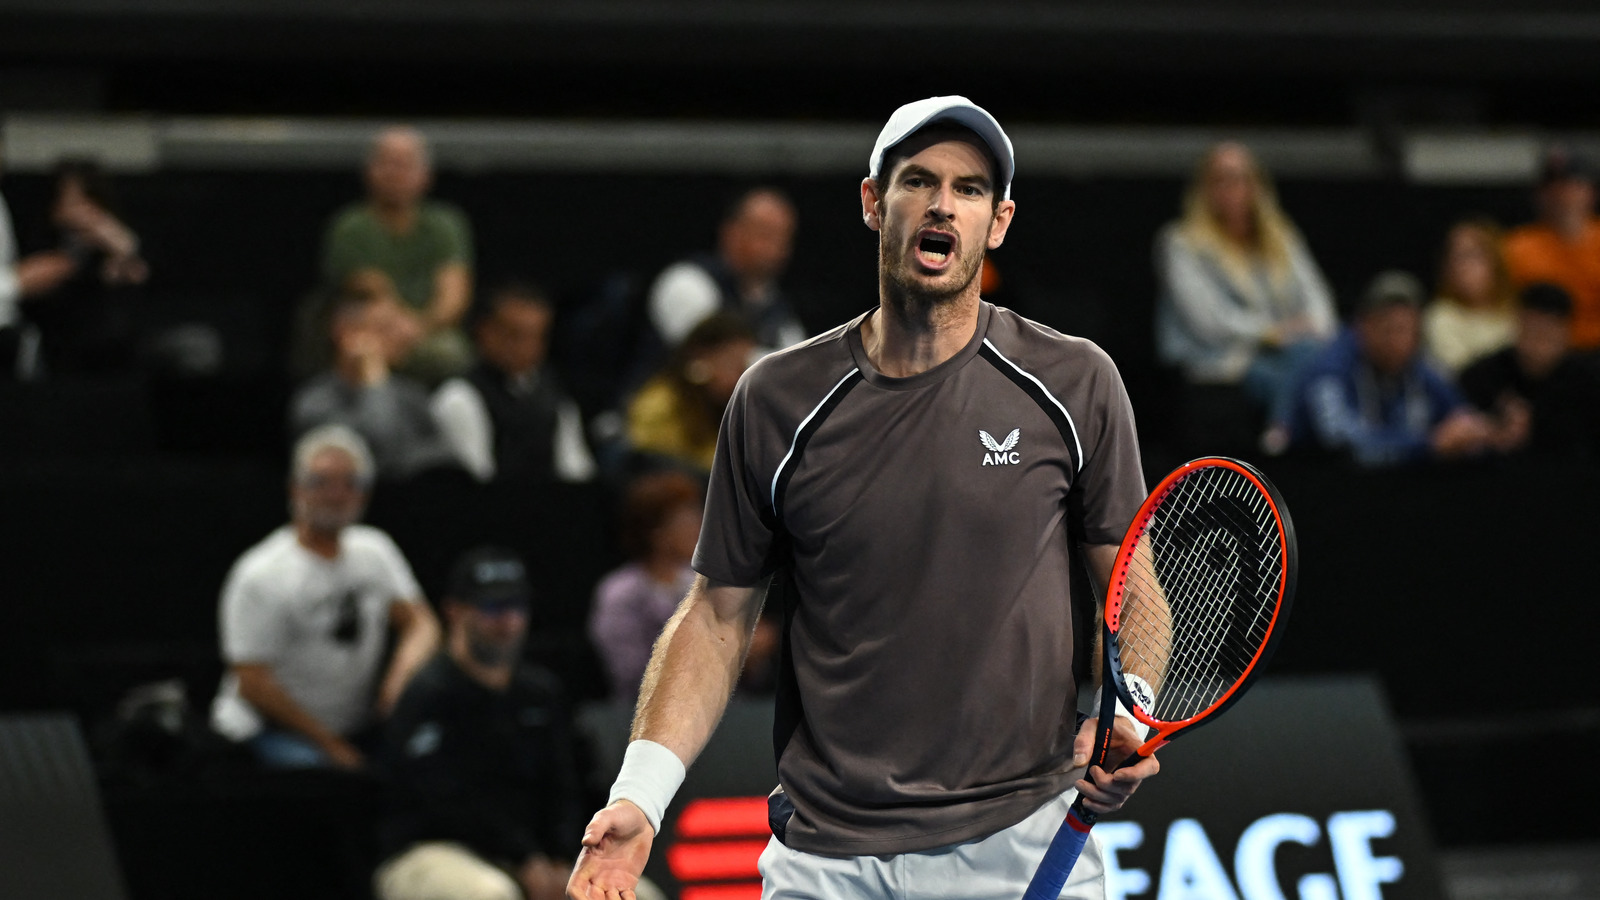 'Don’t have too long left,' Andy Murray sparks retirement rumors once again after sealing 500th hardcourt win in Dubai against Denis Shapovalov